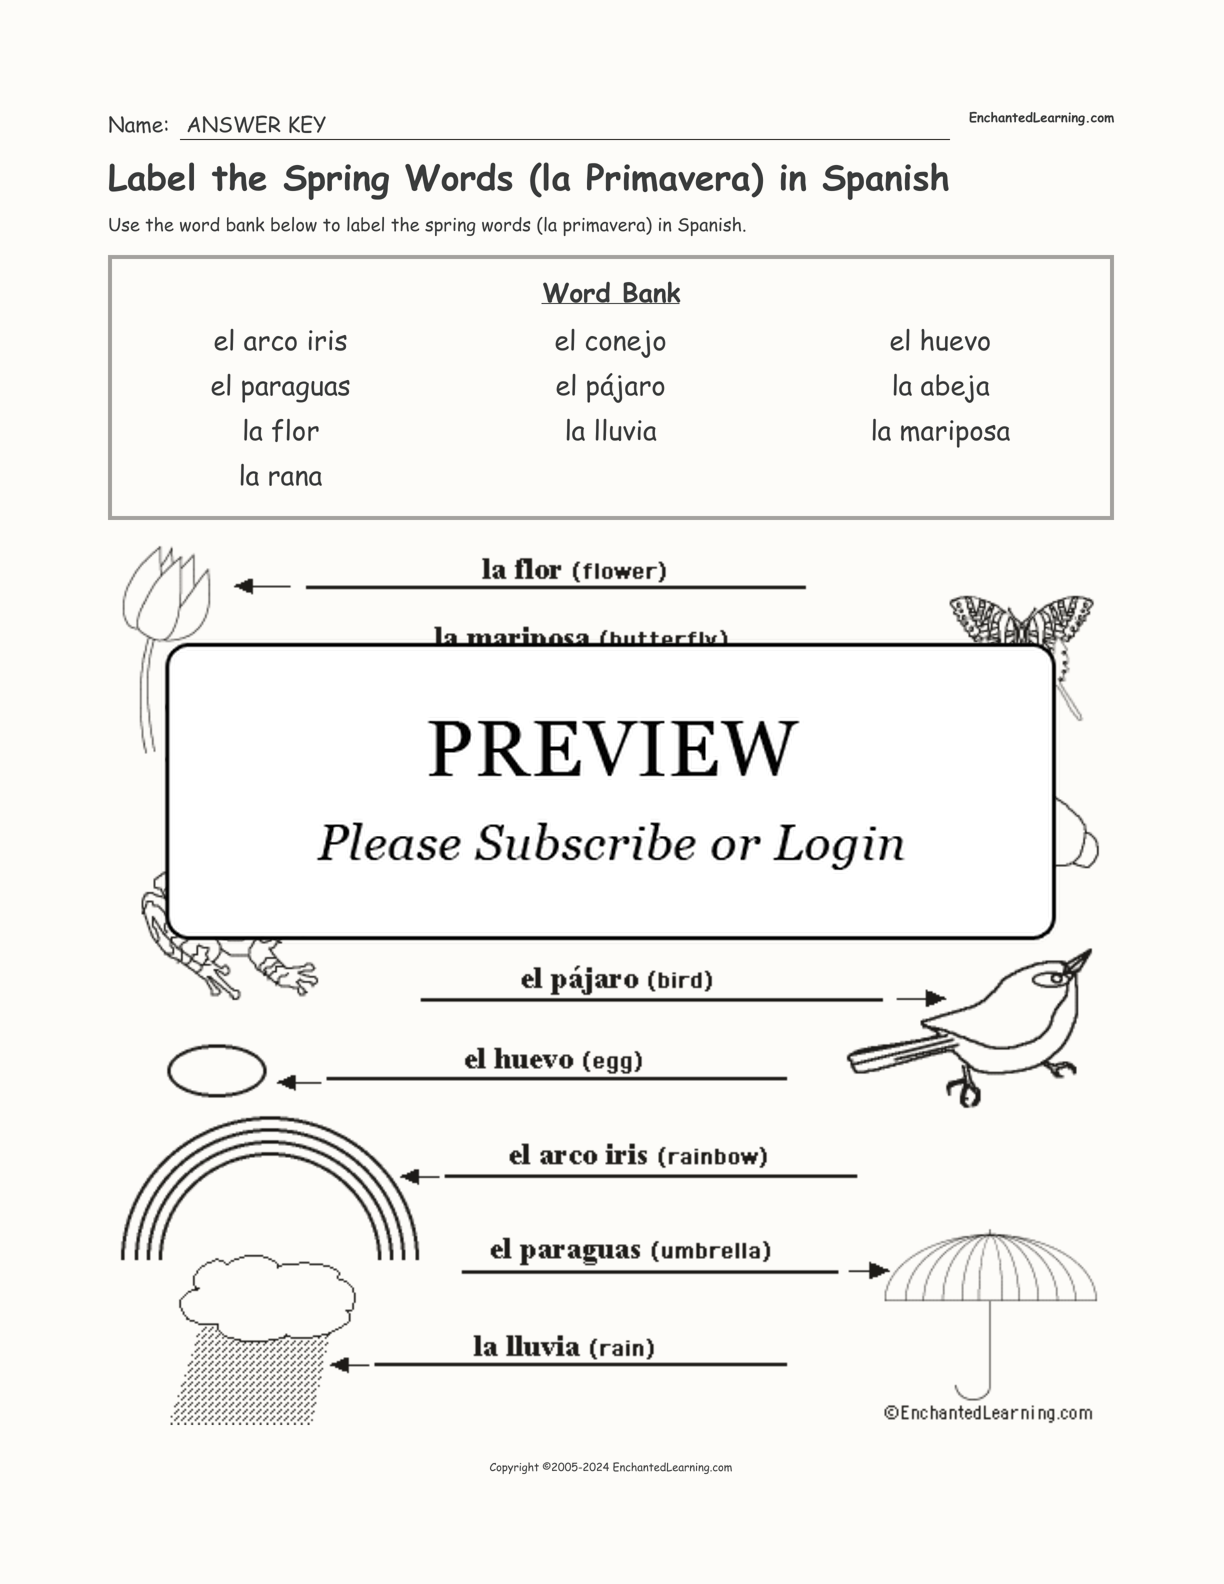 Label the Spring Words (la Primavera) in Spanish interactive worksheet page 2